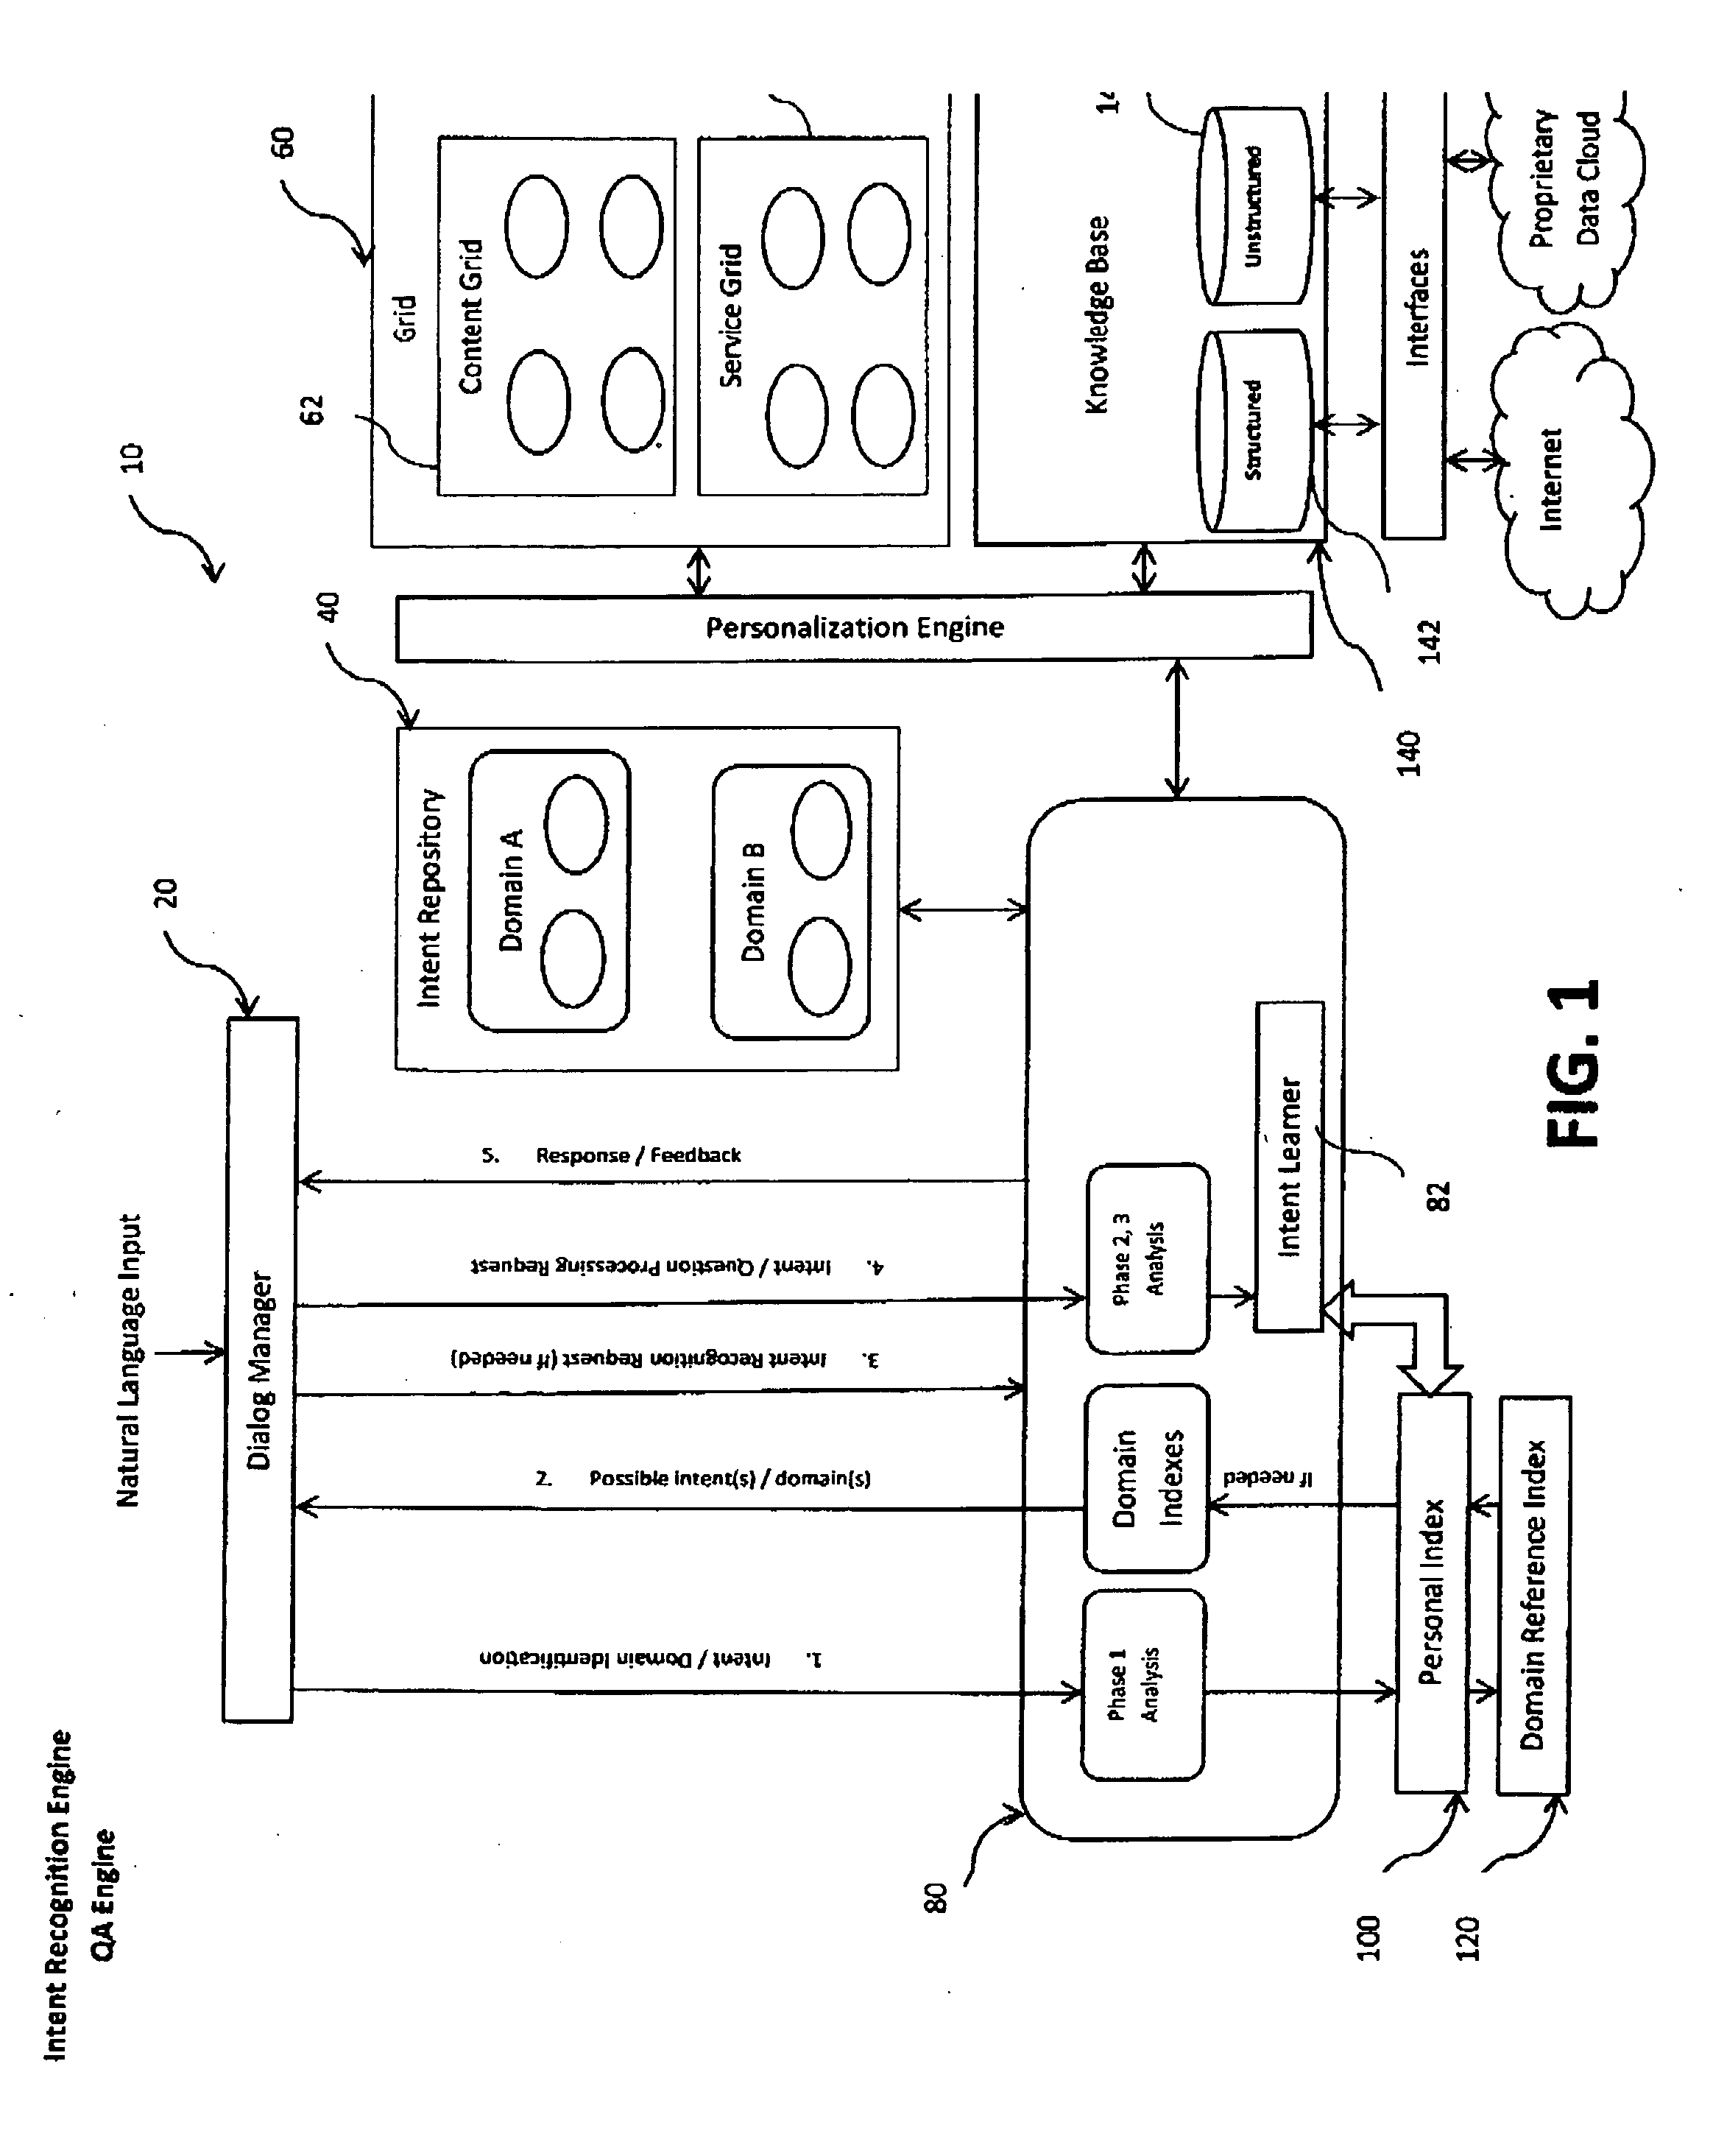 Method and system for quickly recognizing and responding to user intents and questions from natural language input using intelligent hierarchical processing and personalized adaptive semantic interface